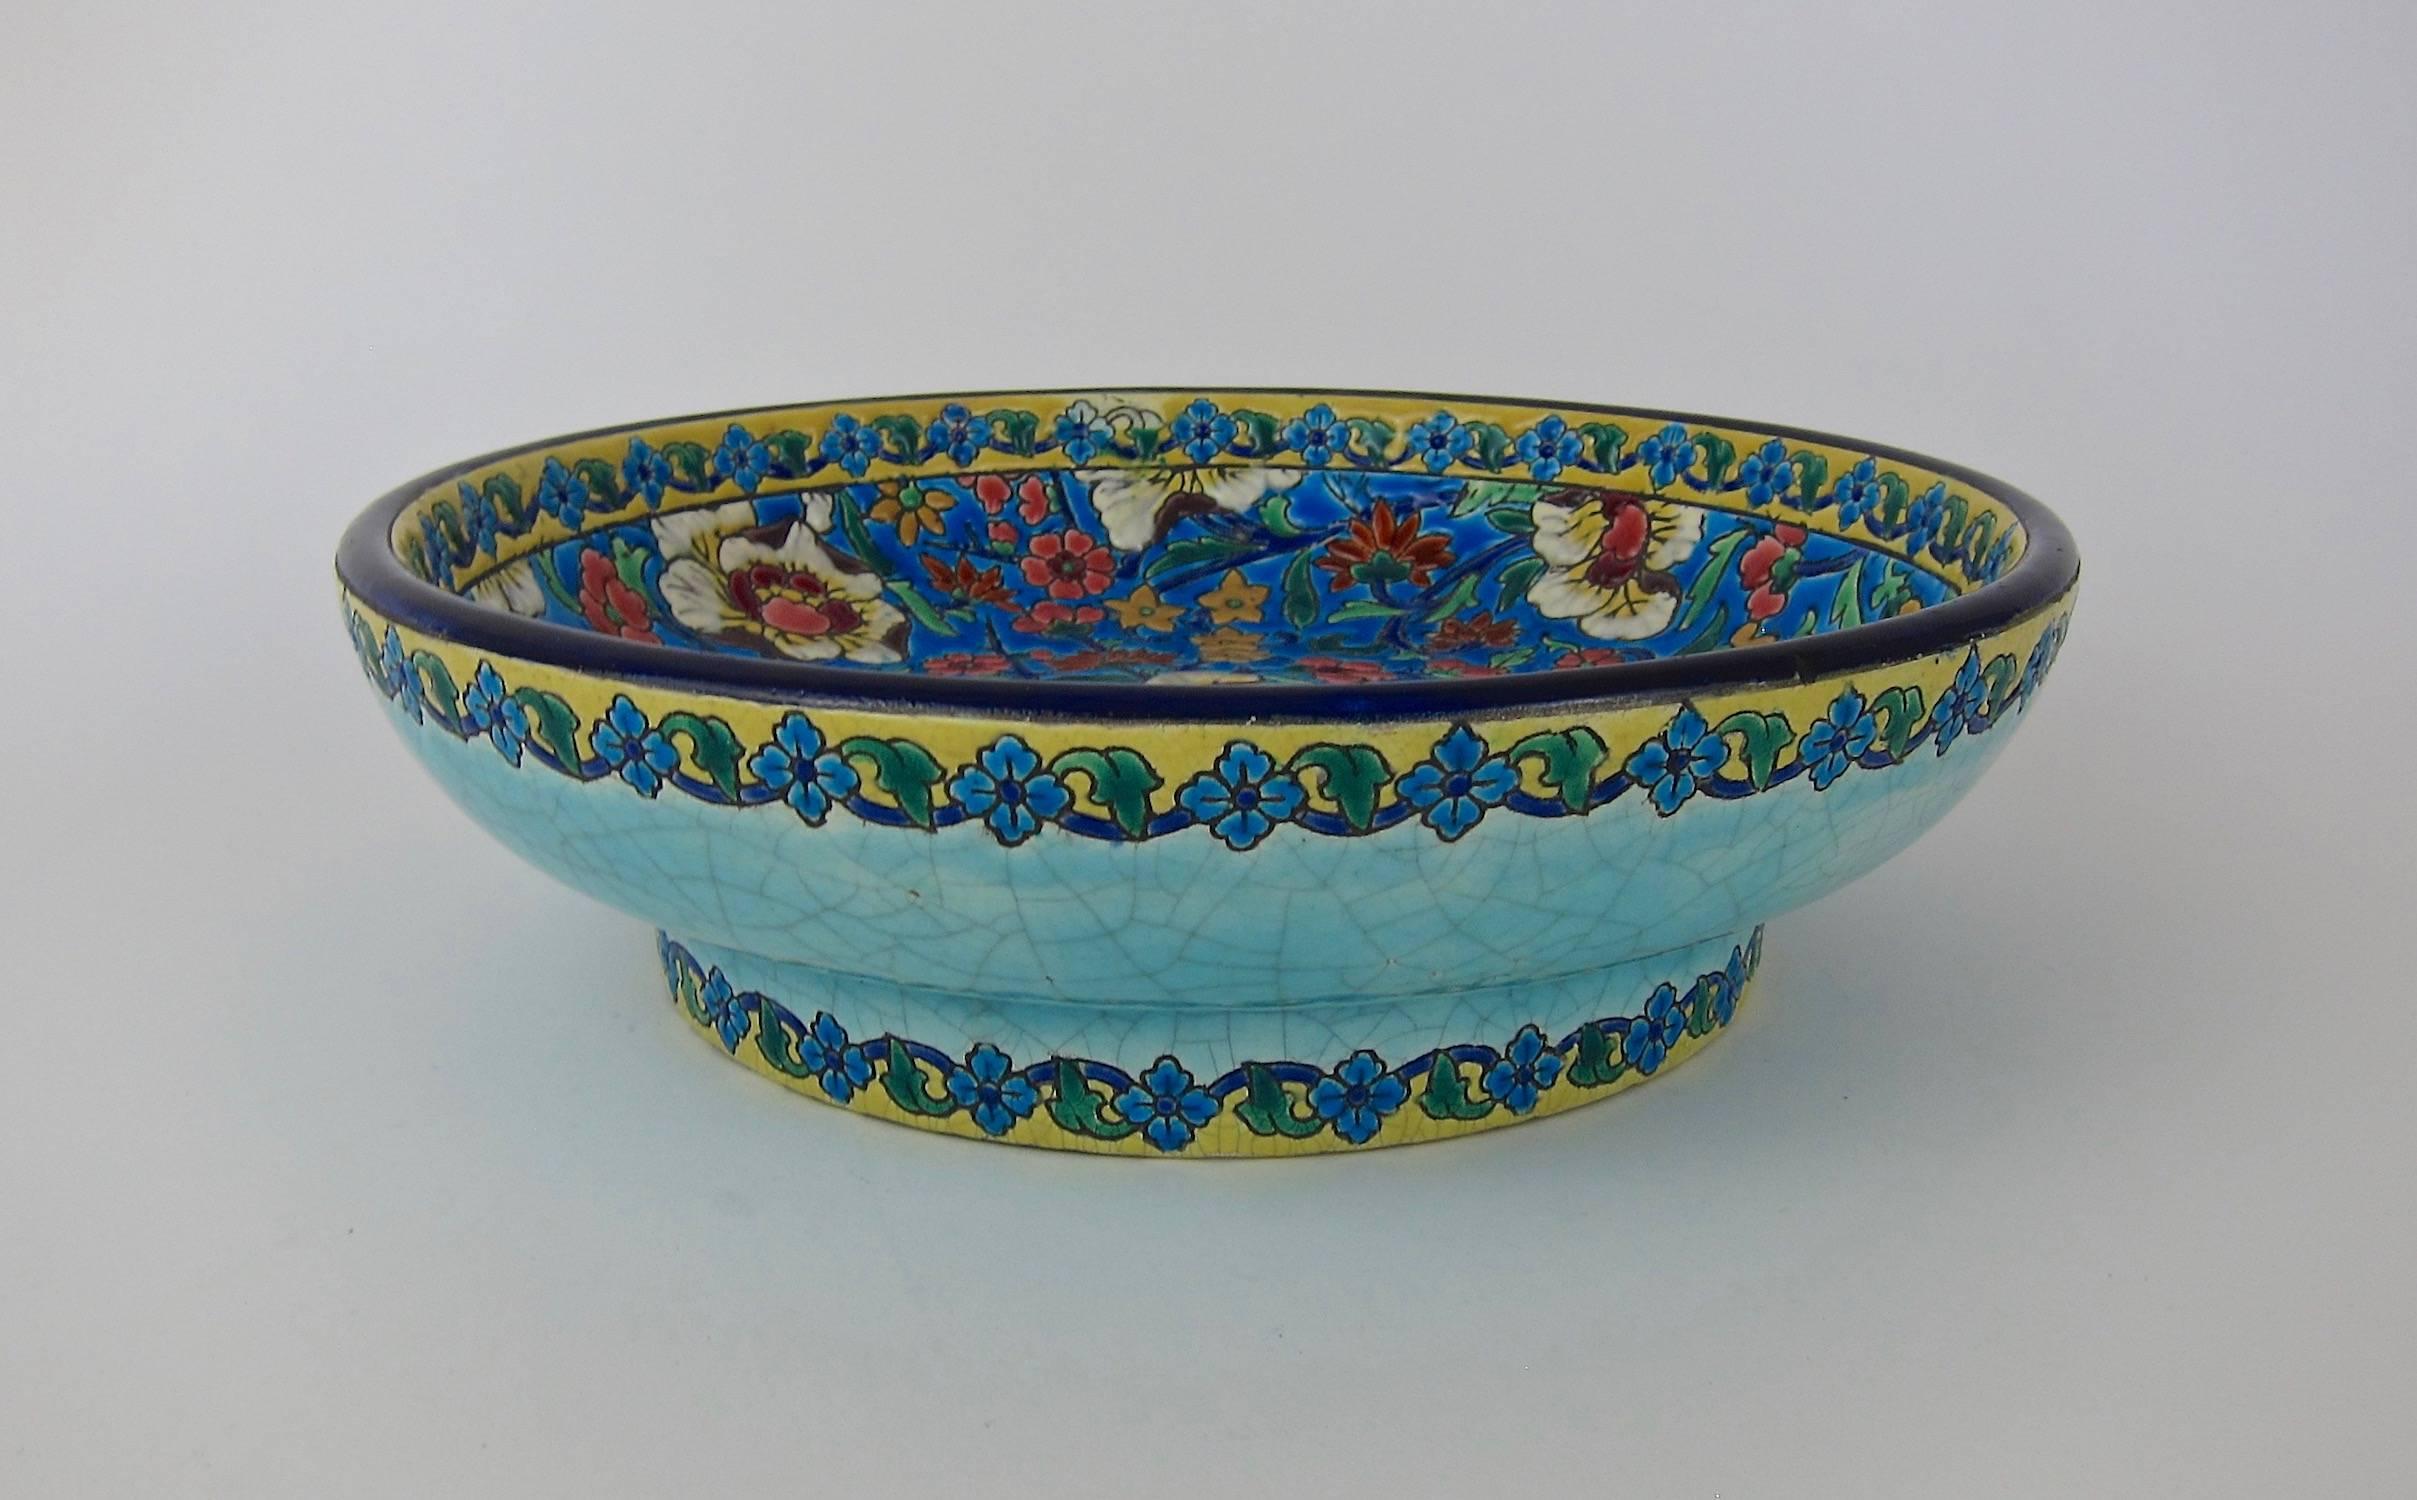 A large Art Deco period faience centerpiece bowl resting on a ring foot, made in France by the Emaux de Longwy art pottery workshop and dating circa 1920s. The earthenware bowl is hand-decorated with Chinoiserie decor and a cloisonné-style enameled